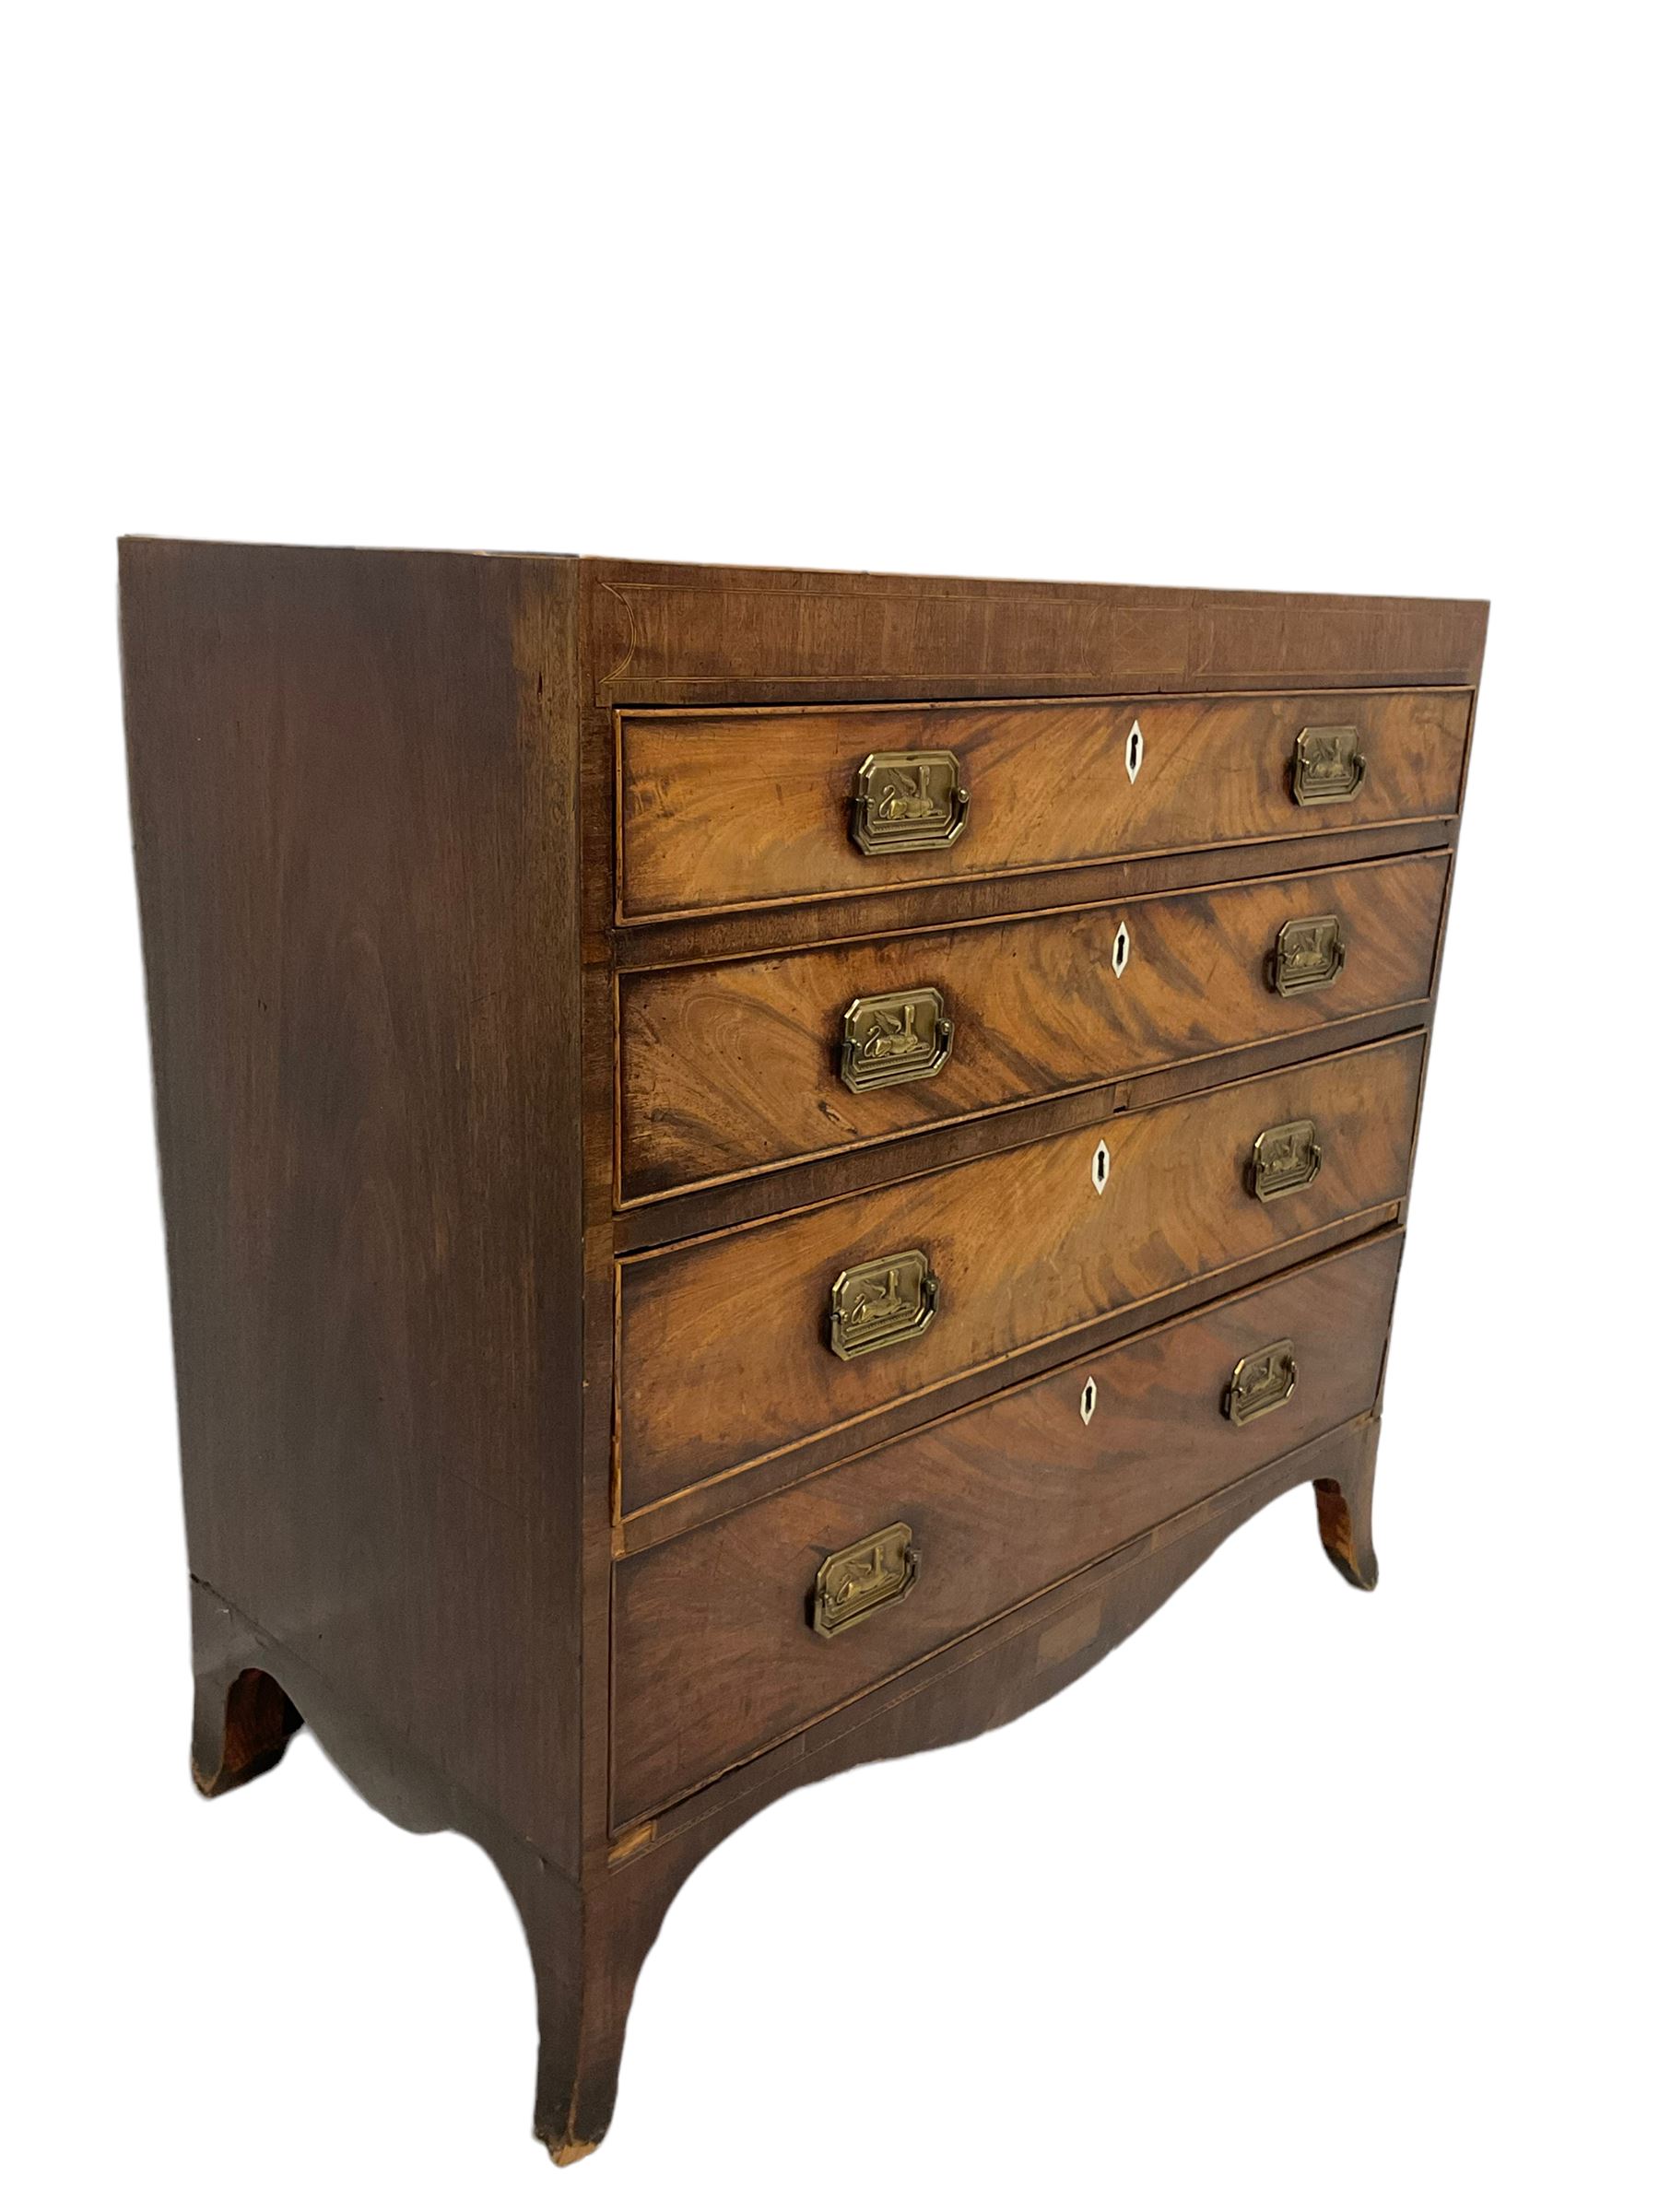 Early 19th century mahogany chest of drawers - Image 3 of 5